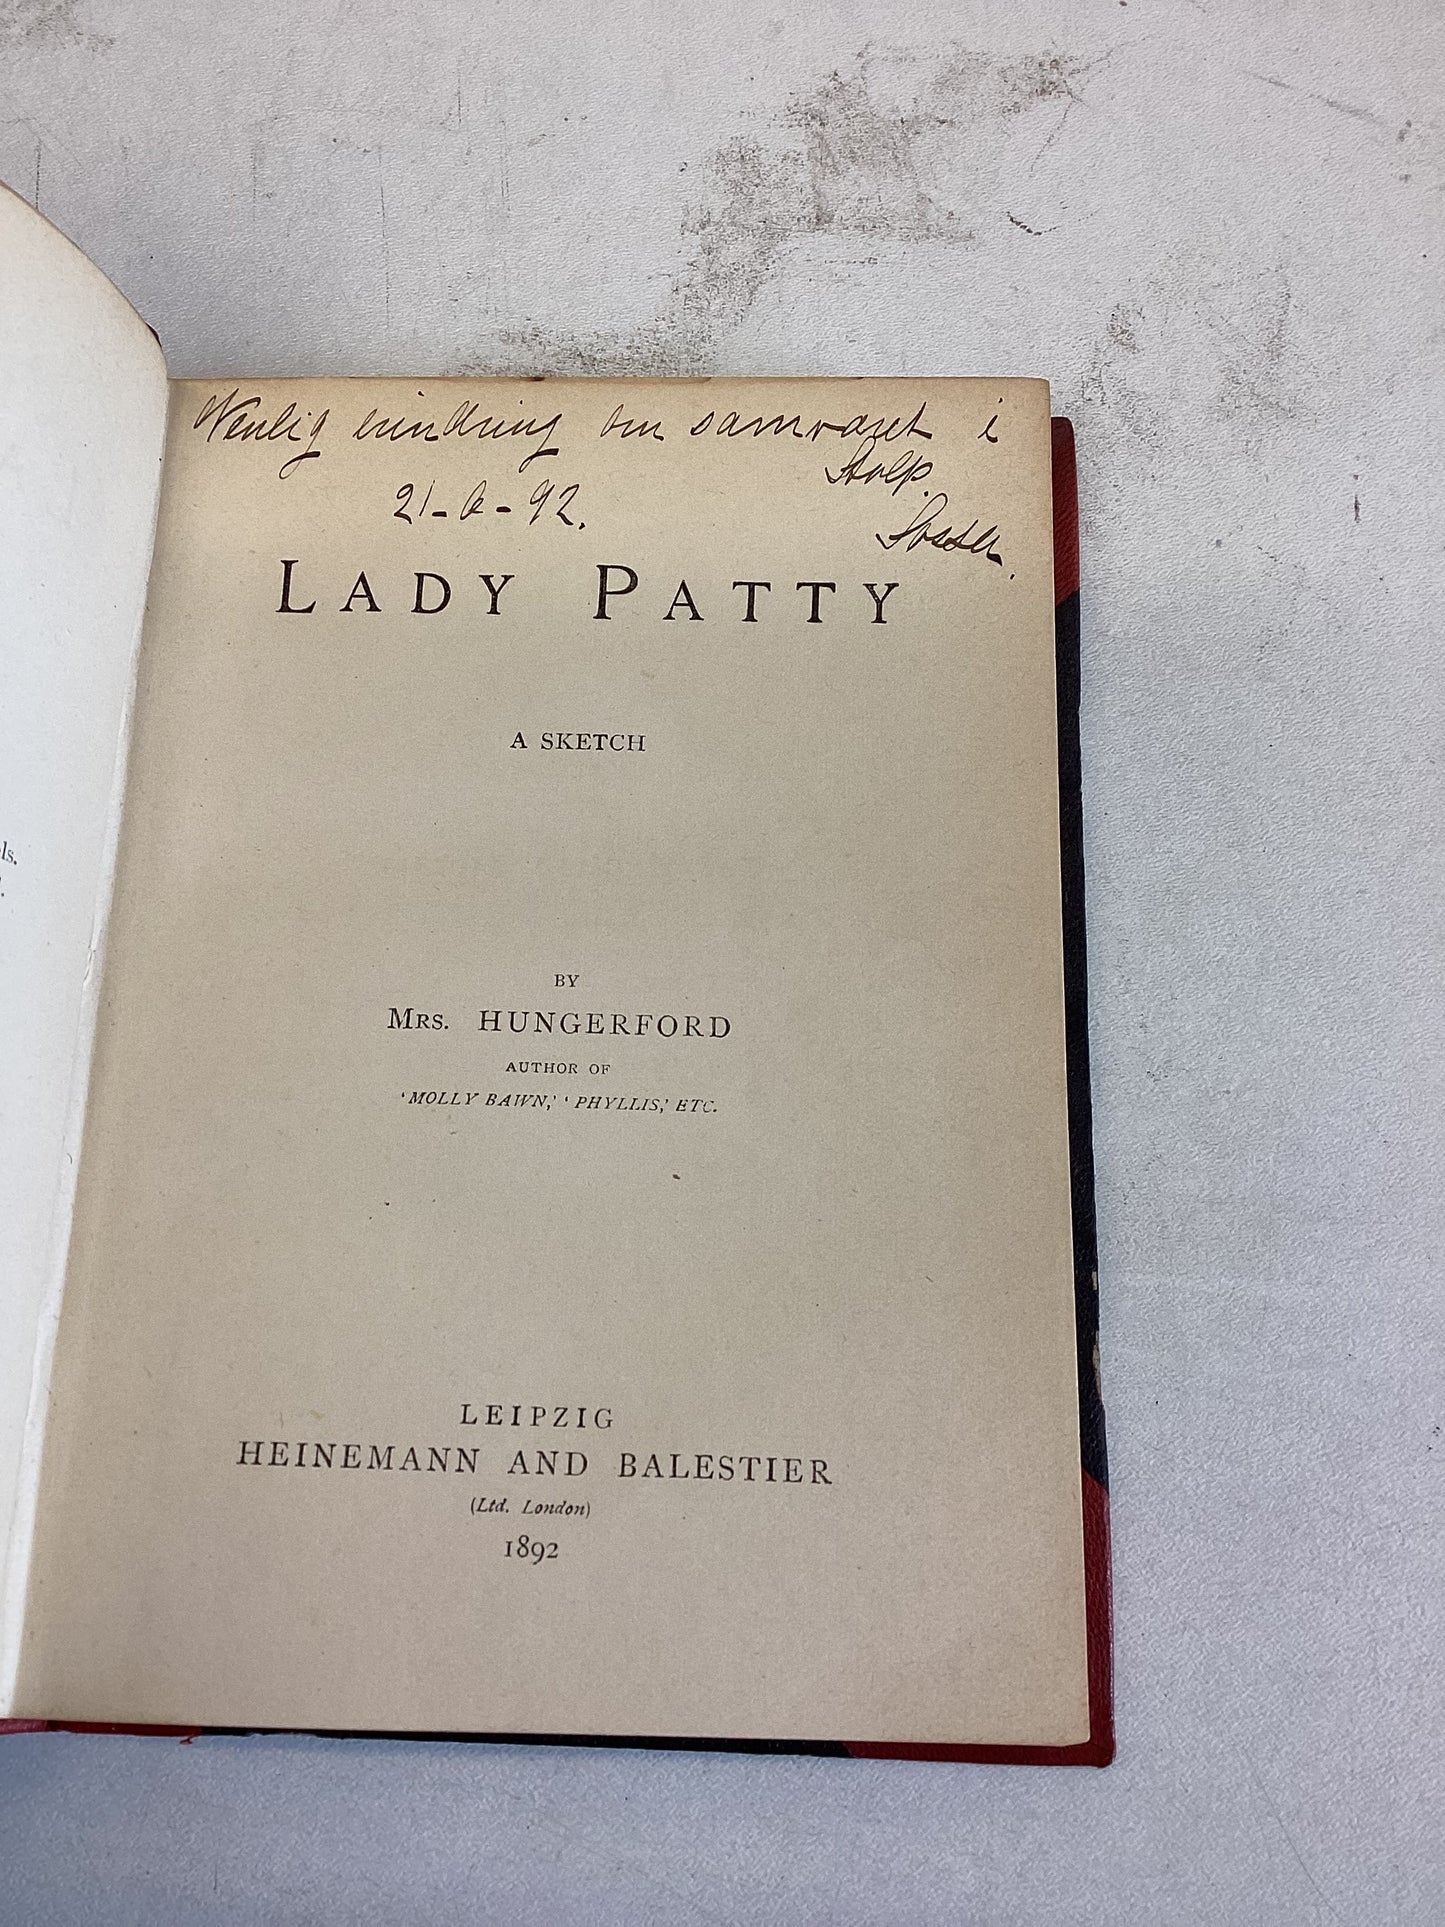 Lady Patty A Sketch by Mrs Hungerford